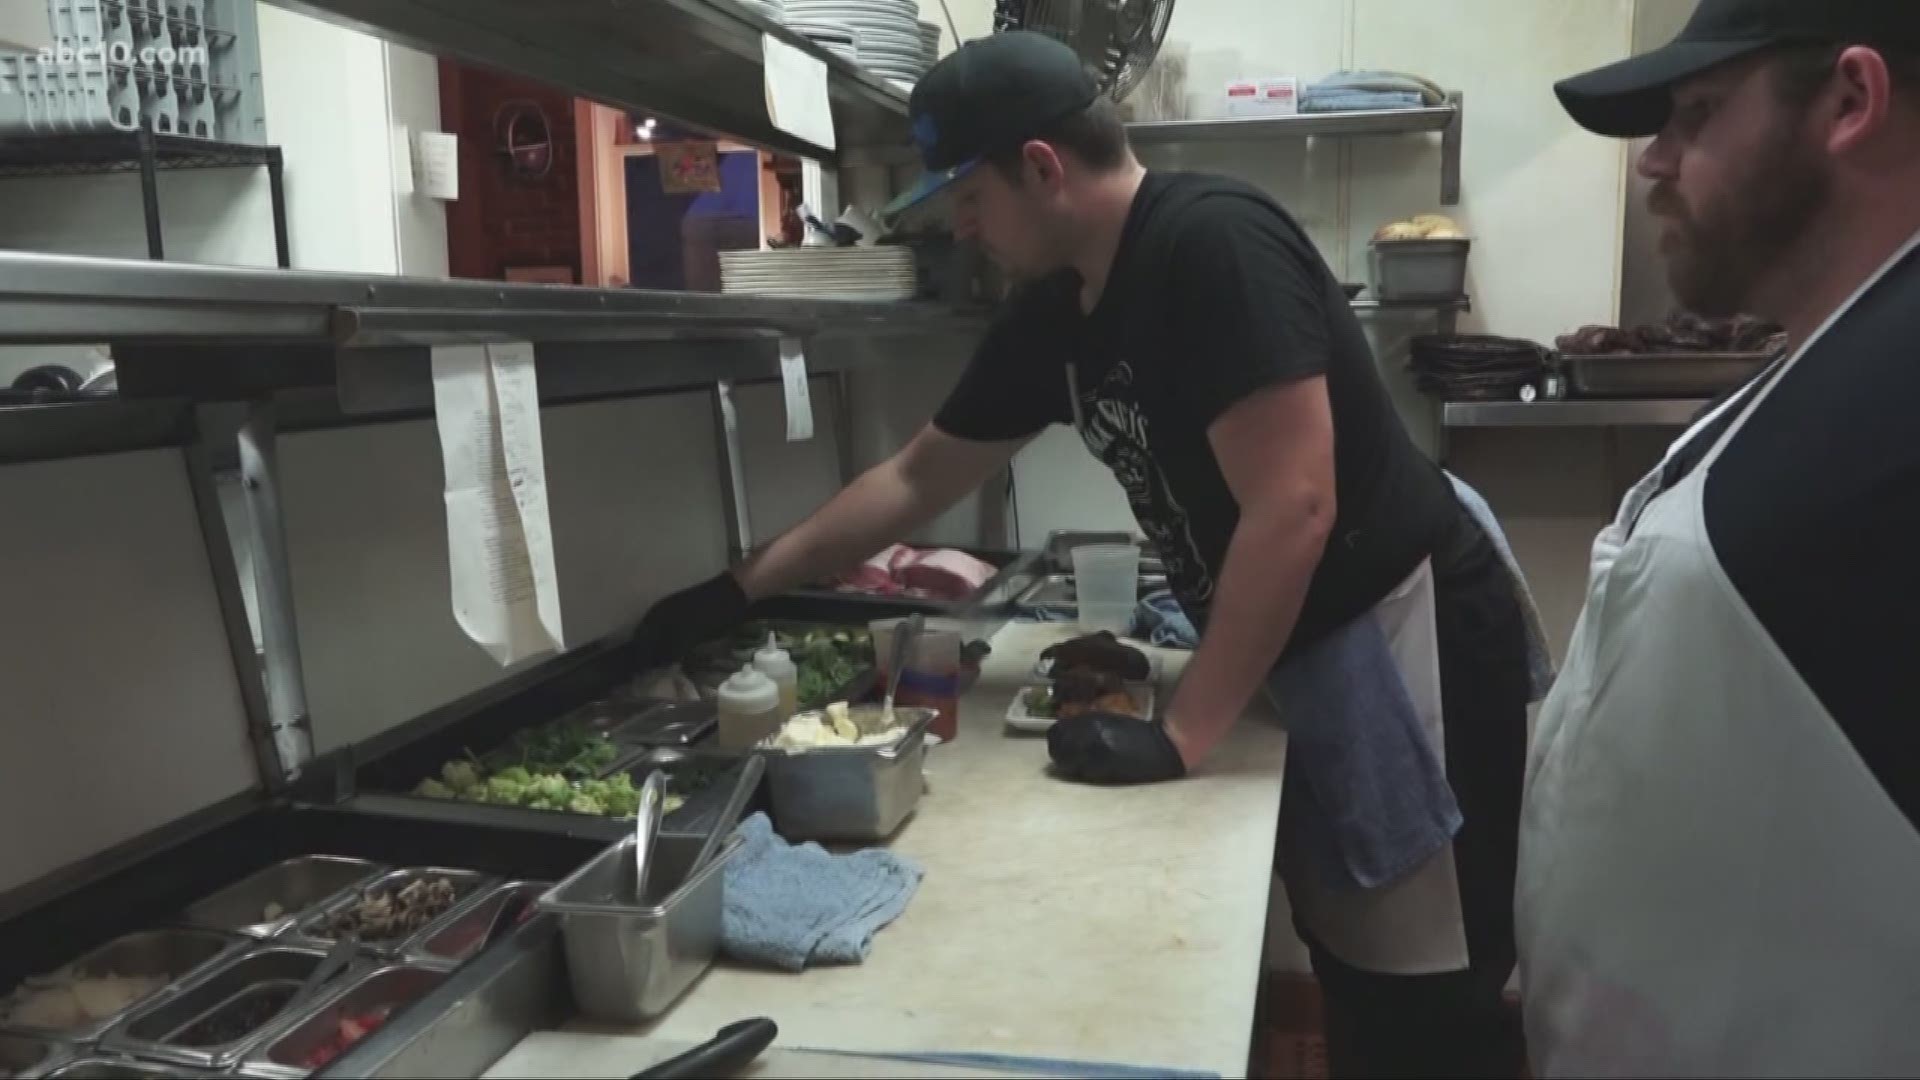 A 2015 study ranks the hospitality and food industry highest among 19 industries for illicit drug use and 3rd highest for heavy alcohol use. Sacramento Chef Patrick Mulvaney and more than a dozen Sacramento chefs met with mental health experts and other community partners, to create a new program for the hospitality and restaurant industry.